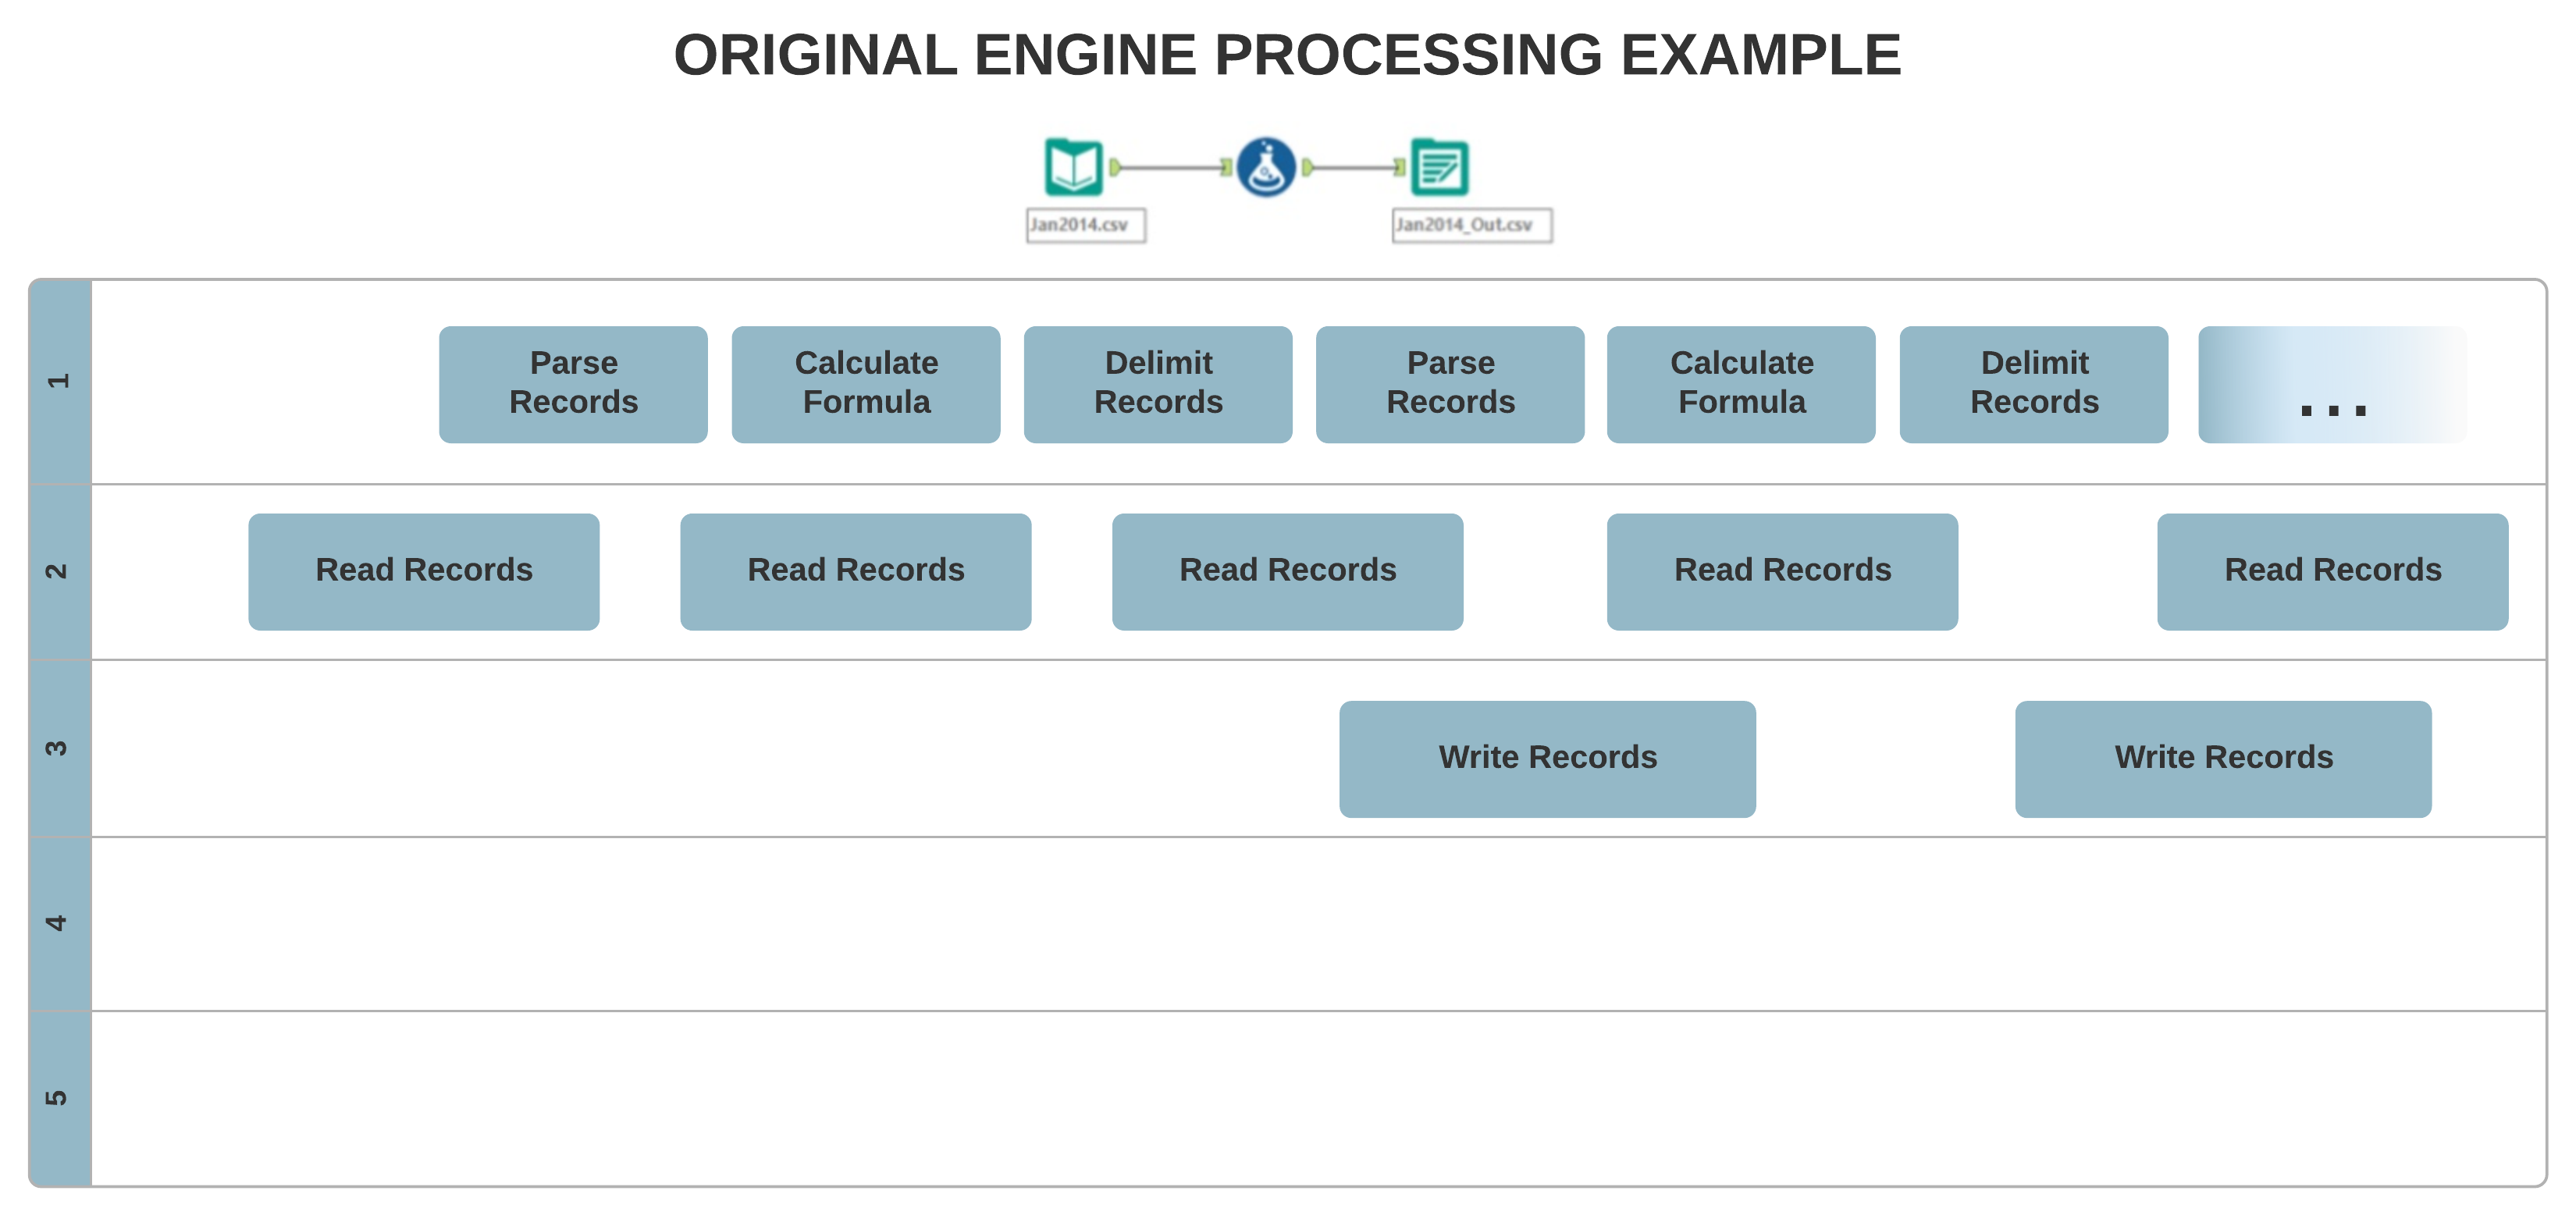 The original engine architecture allows for a single-threaded process, where your data is processed record-by-record.